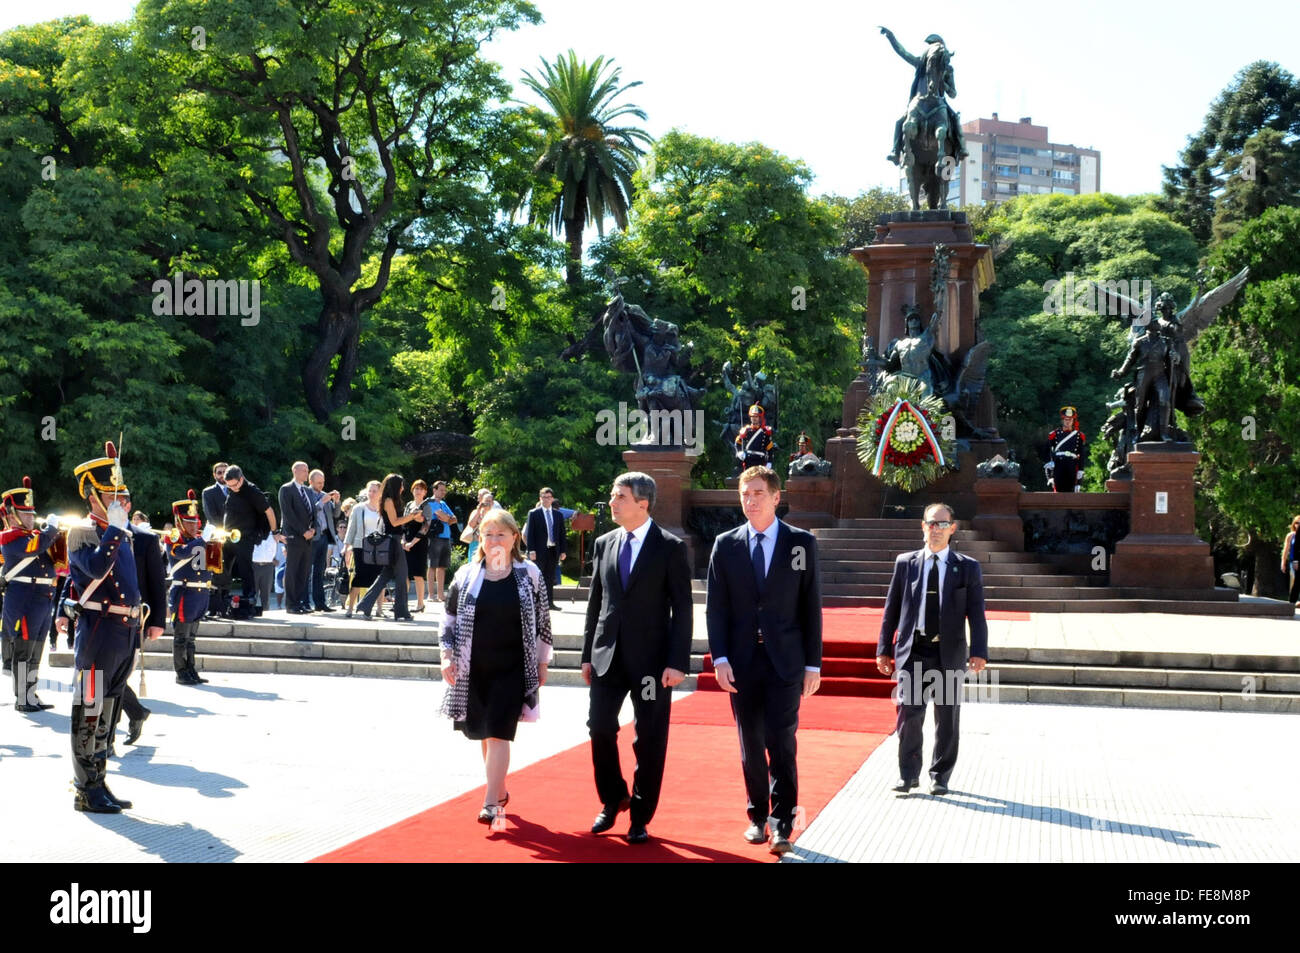 Buenos Aires, Argetina. 4th Feb, 2016. Bulgaria's President Rosen Plevneliev (C, Front) and Argentine Foreign Minister Susana Malcorra (L, Front), attend a wreath ceremony at General San Martin Monument, in Plaza San Martin, in Buenos Aires, Argetina, on Feb. 4, 2016. Rosen Plevneliev is on an official visit in Argentina. © Daniel Garagiola/Prensa Canciller¨ªa/TELAM/Xinhua/Alamy Live News Stock Photo